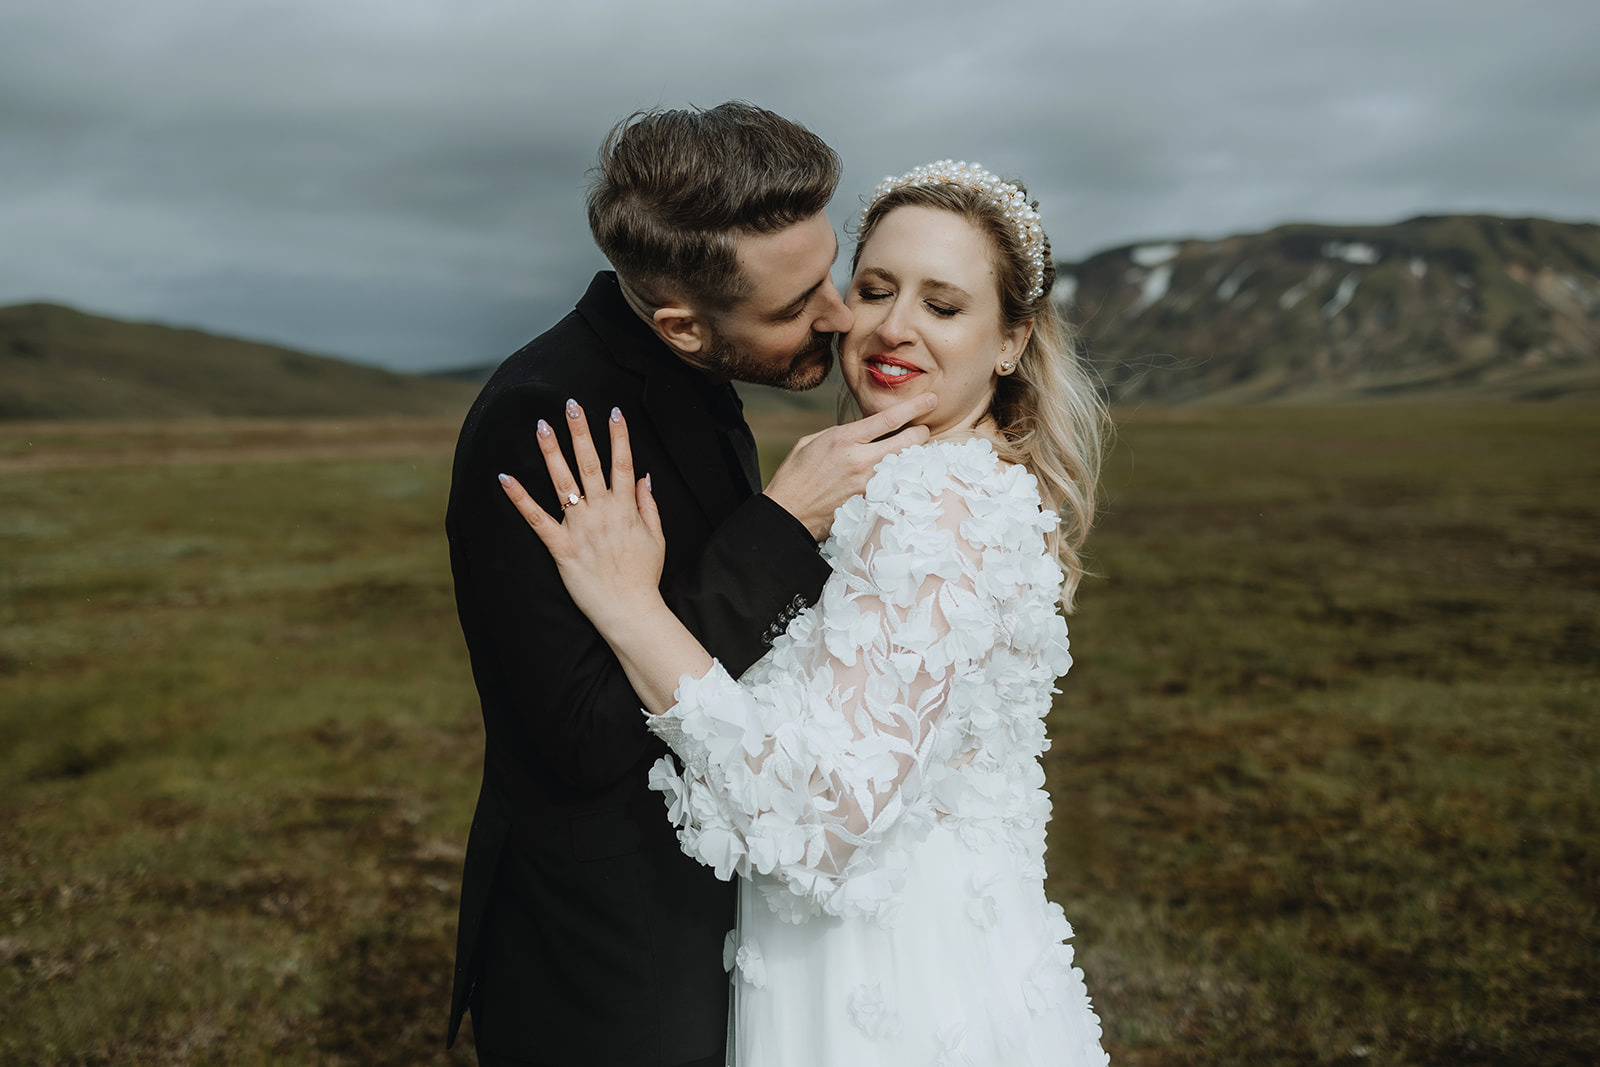 Married couple in wedding attire embracing tightly in the dramatic and moody landscape of the Icelandic highlands,